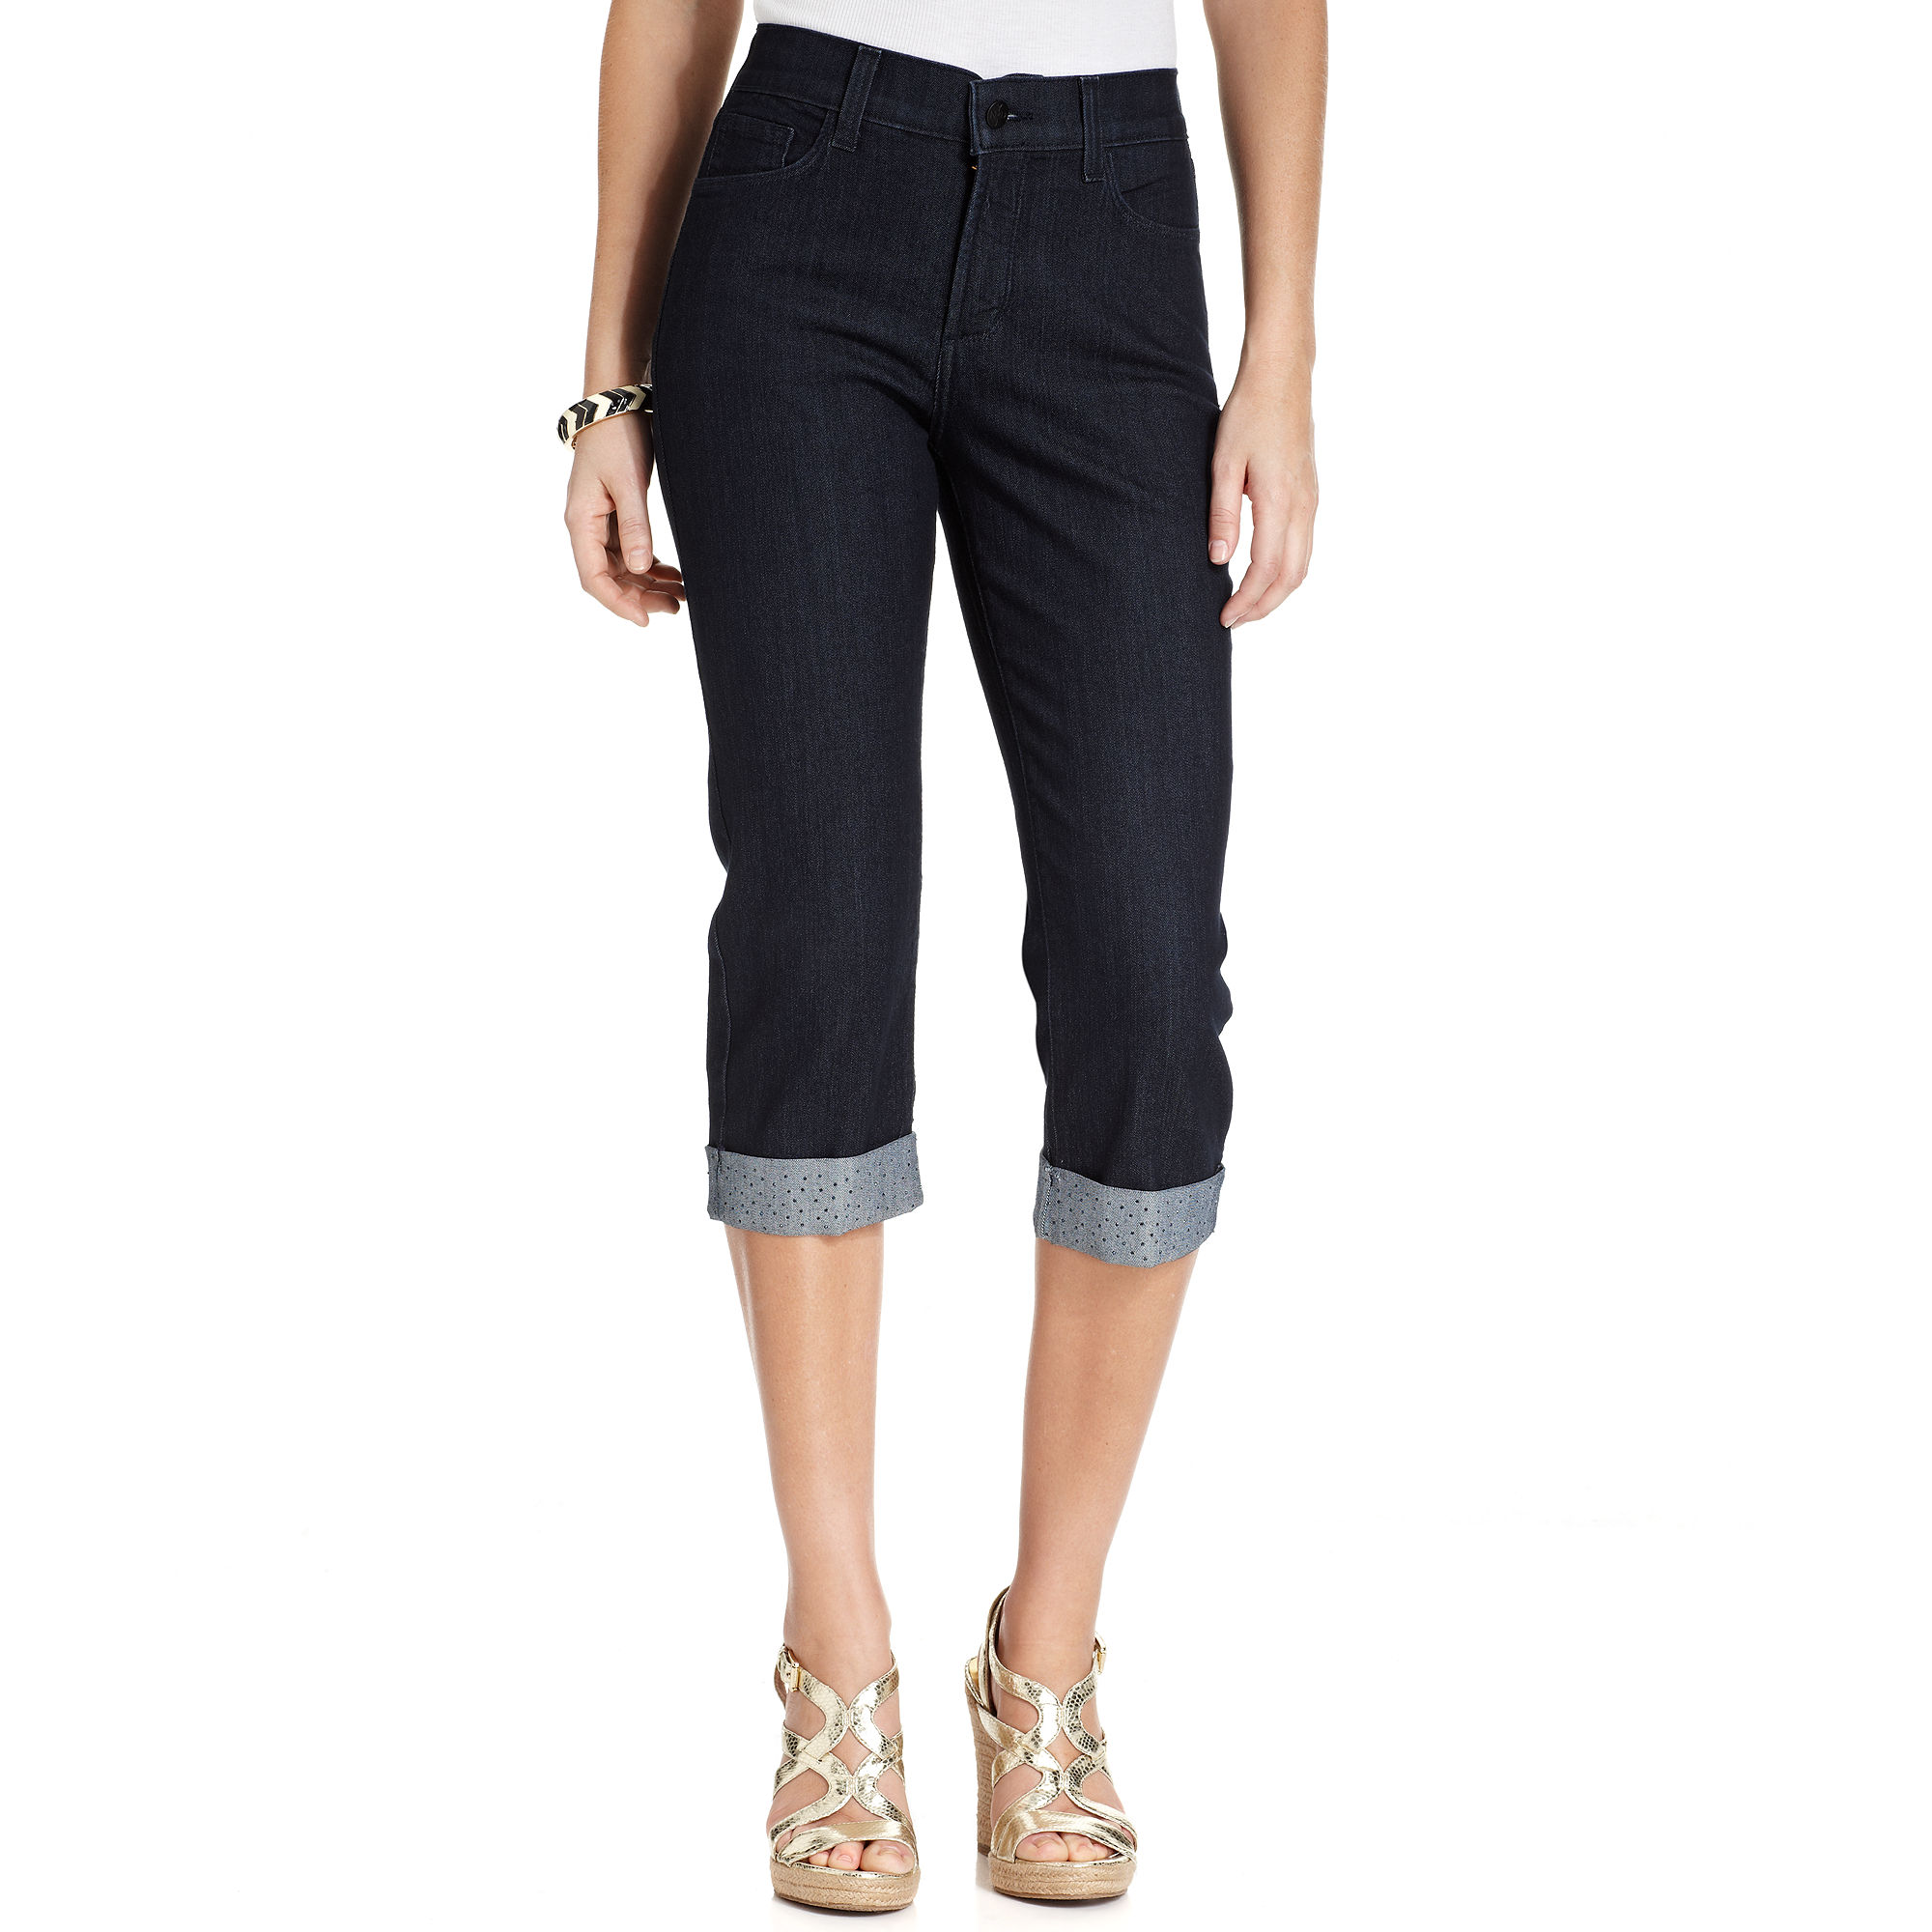 Lyst - Not Your Daughter'S Jeans Nydj Jeans Alyssa Skinny Studded ...